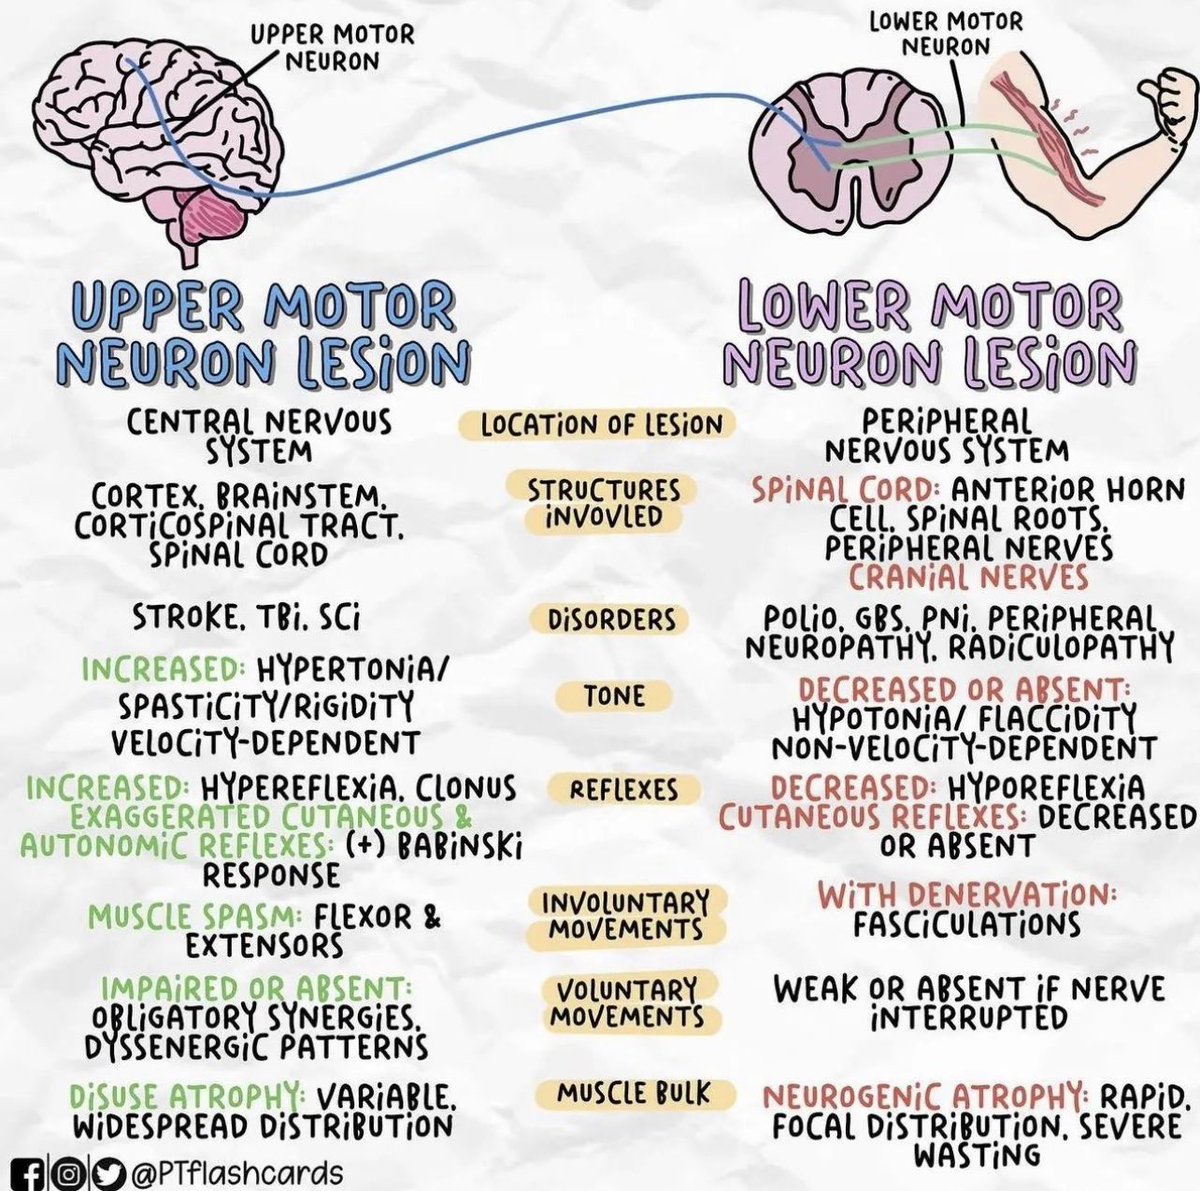 Differentiating upper motor neuron from lower motor neuron disease by @PTFlashcards